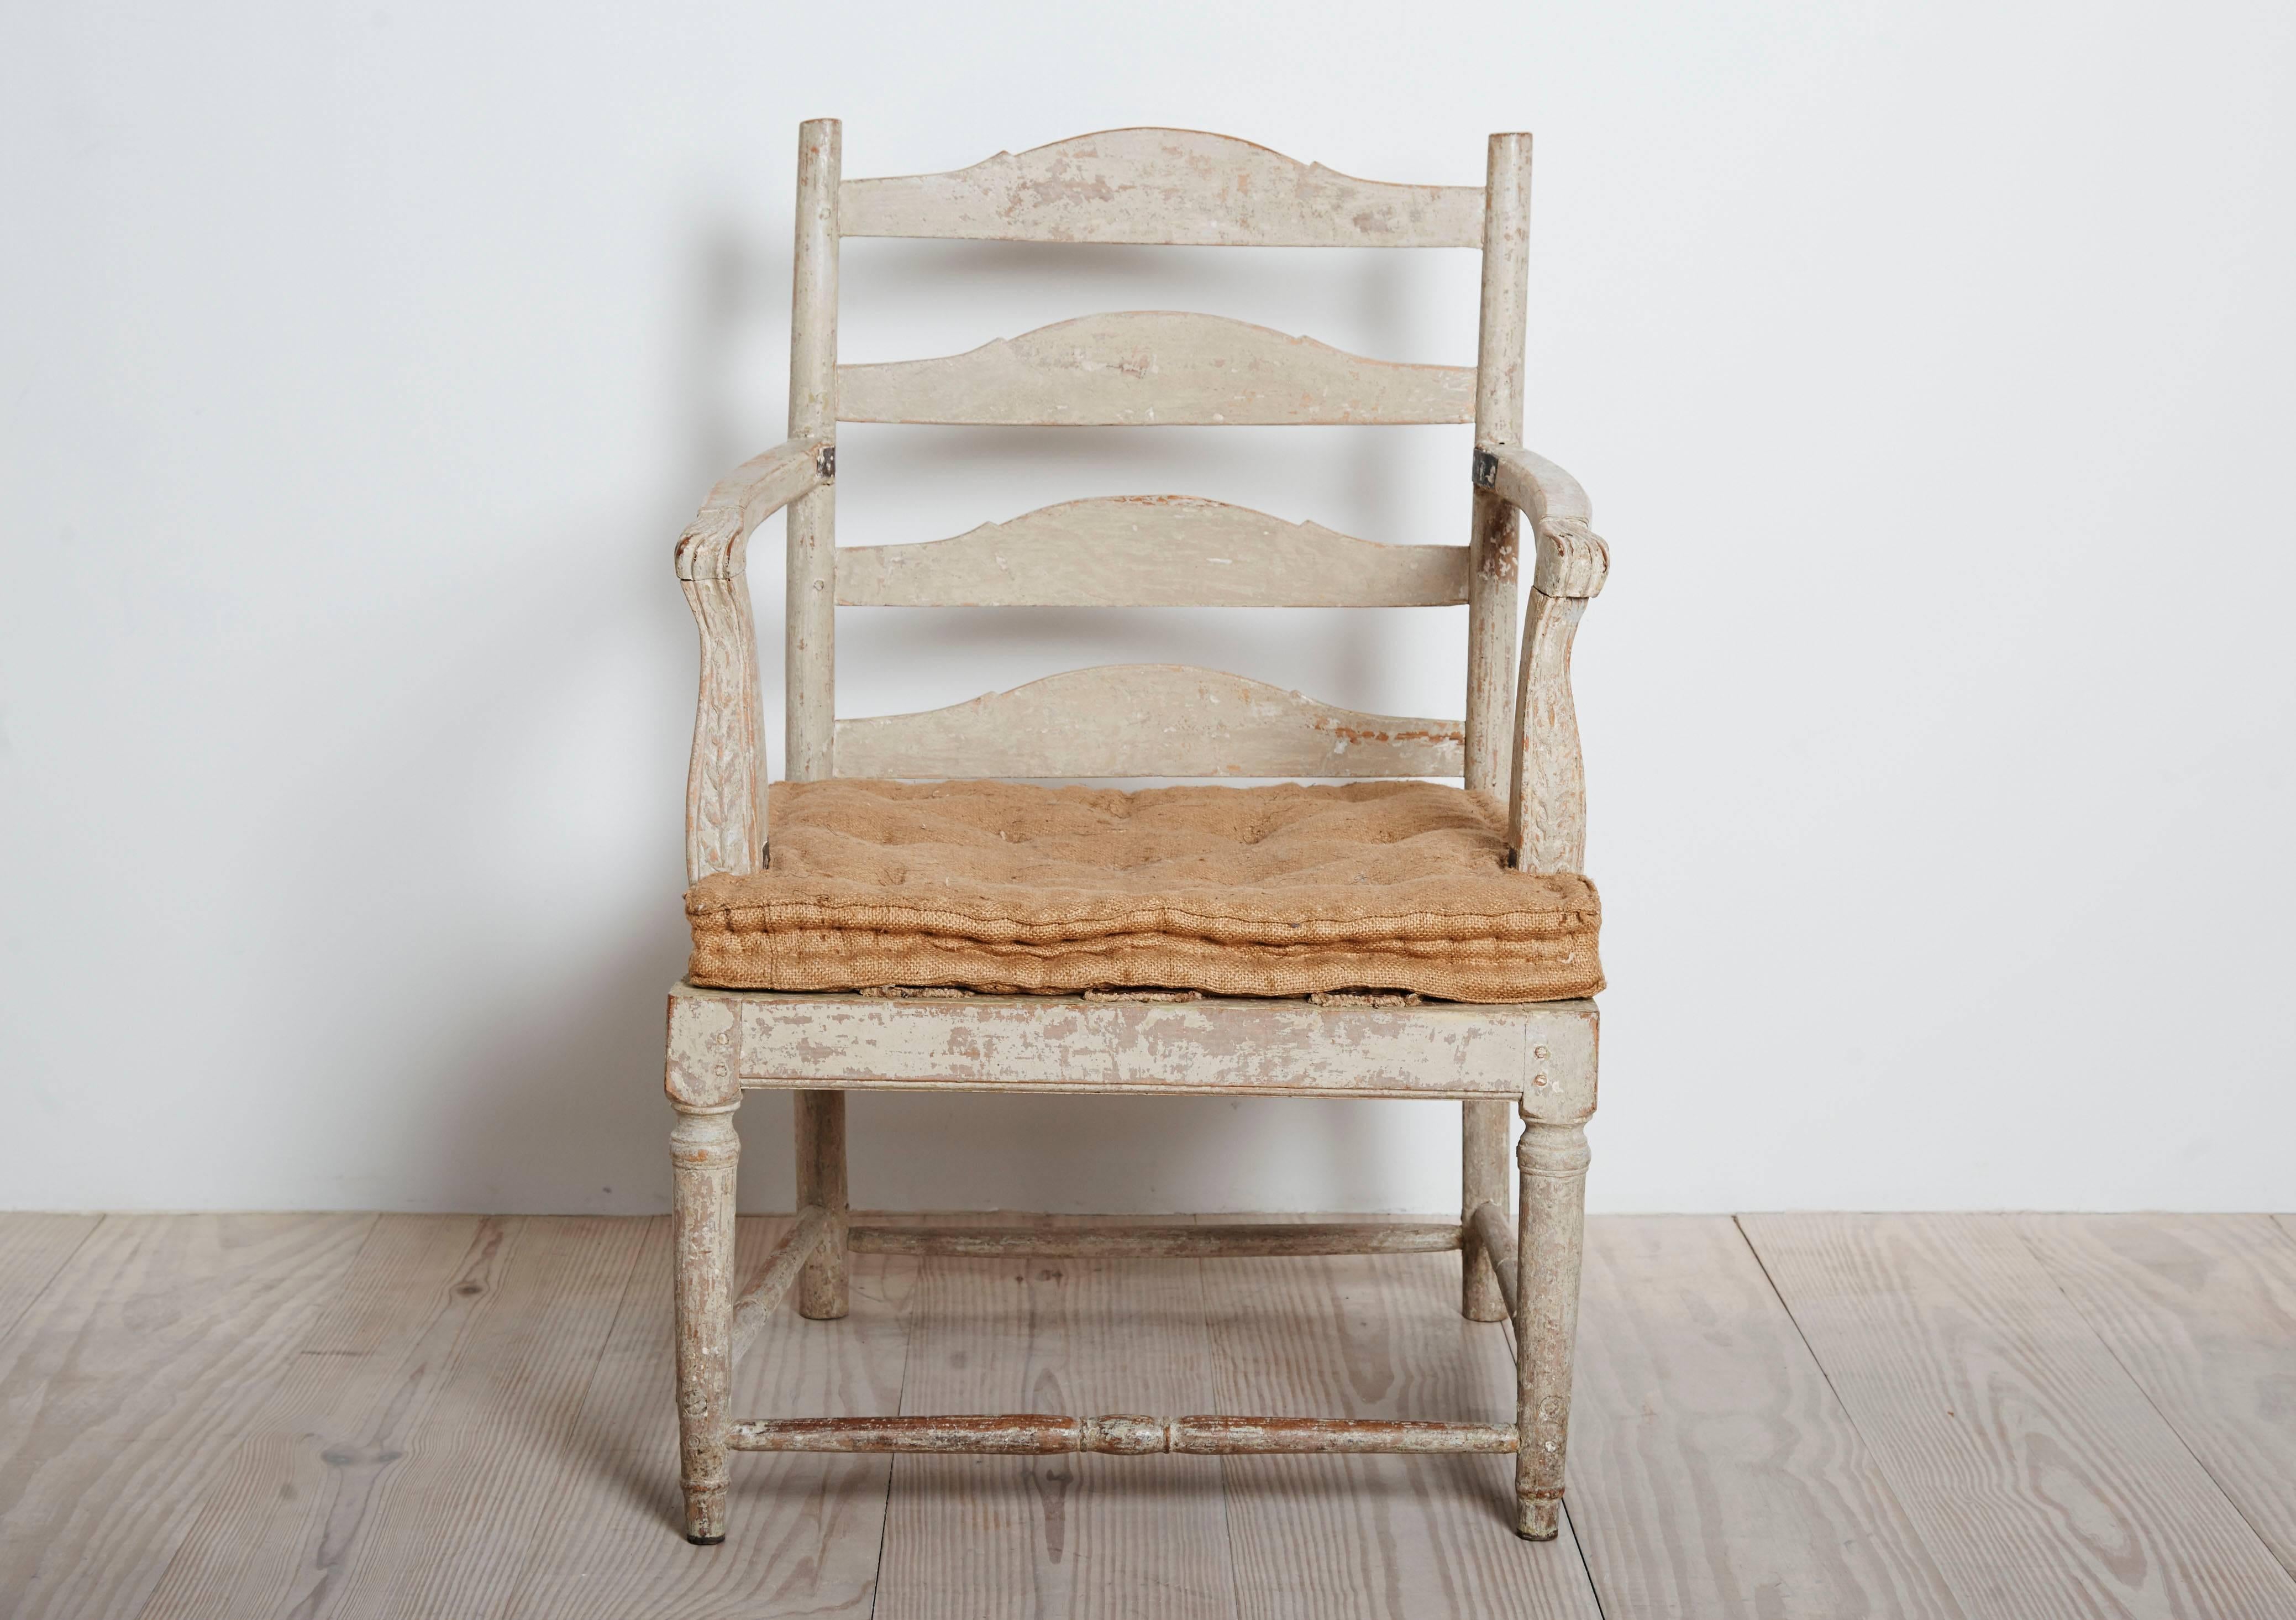 Exceptional and rare Swedish Gripsholm transitional Rococo / Gustavian armchair with unusual carvings and details, circa 1775, origin: Sweden, original paint with charming old repairs.
 
Provenance: Rosendals Slotts, Sweden

Gripsholm Slott, is a